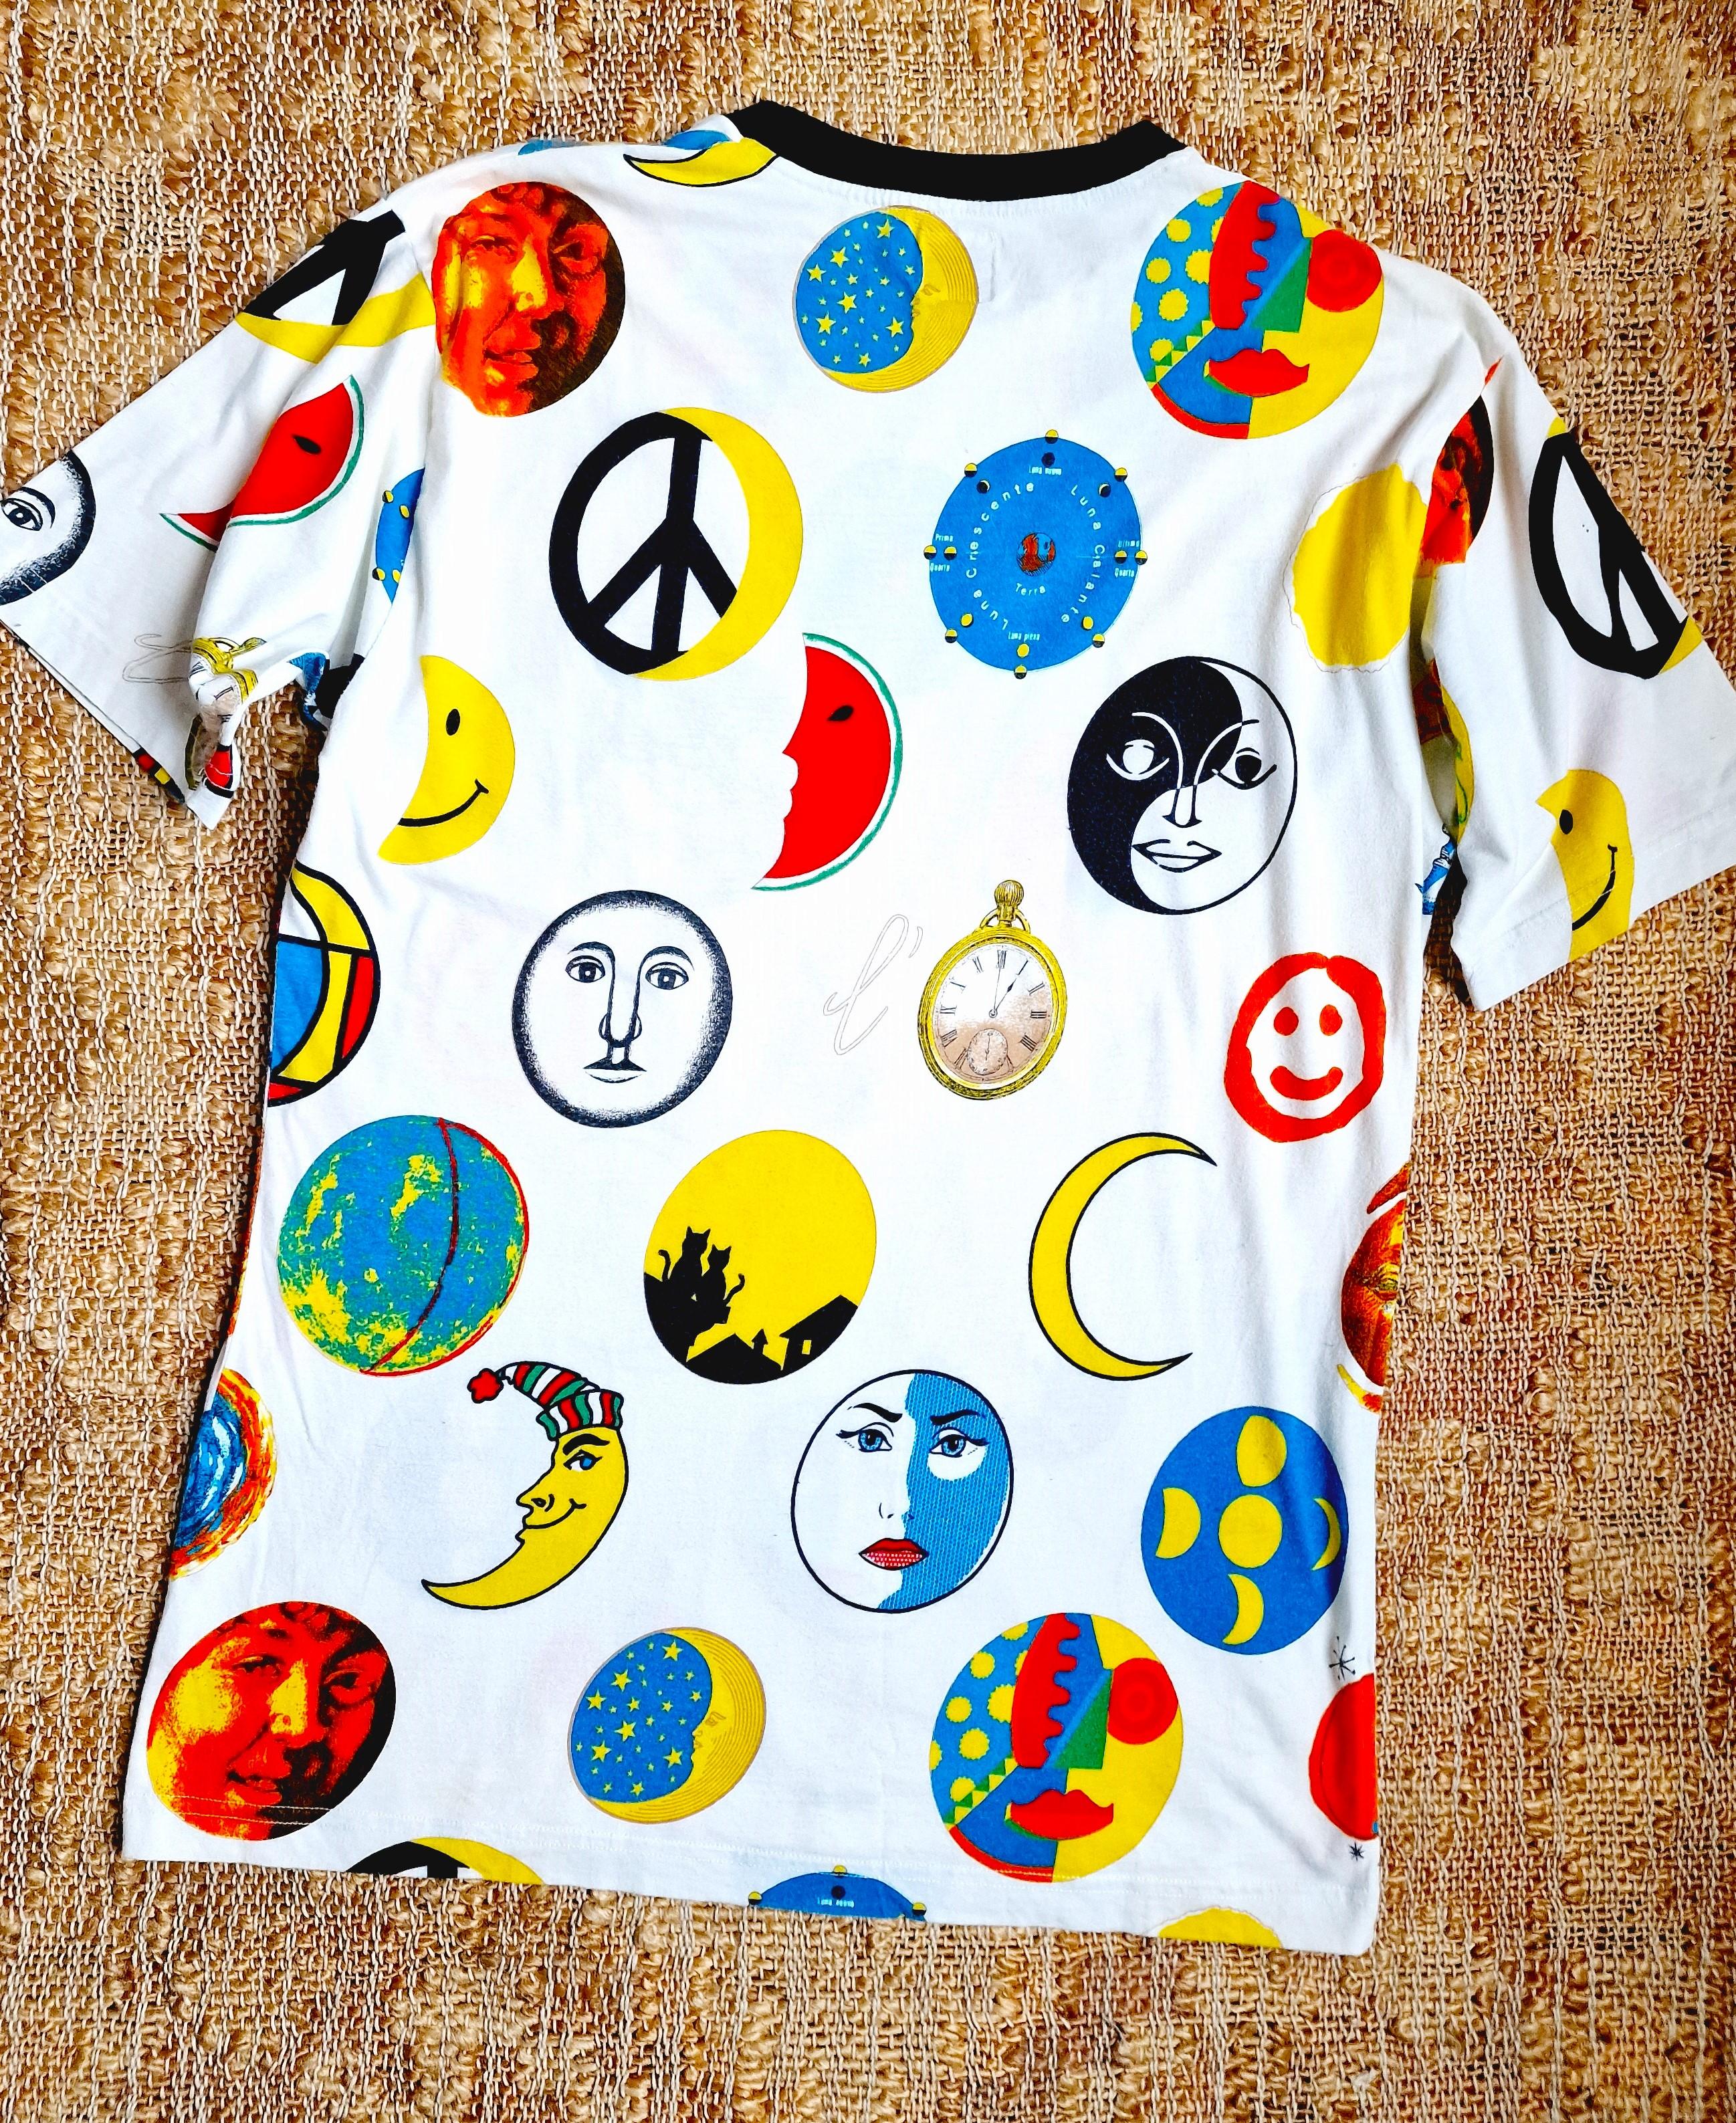 Moschino Symbol Round Moon Sun Peace Money Smily Jin Jang Medium Top Tee T-shirt In Excellent Condition For Sale In PARIS, FR